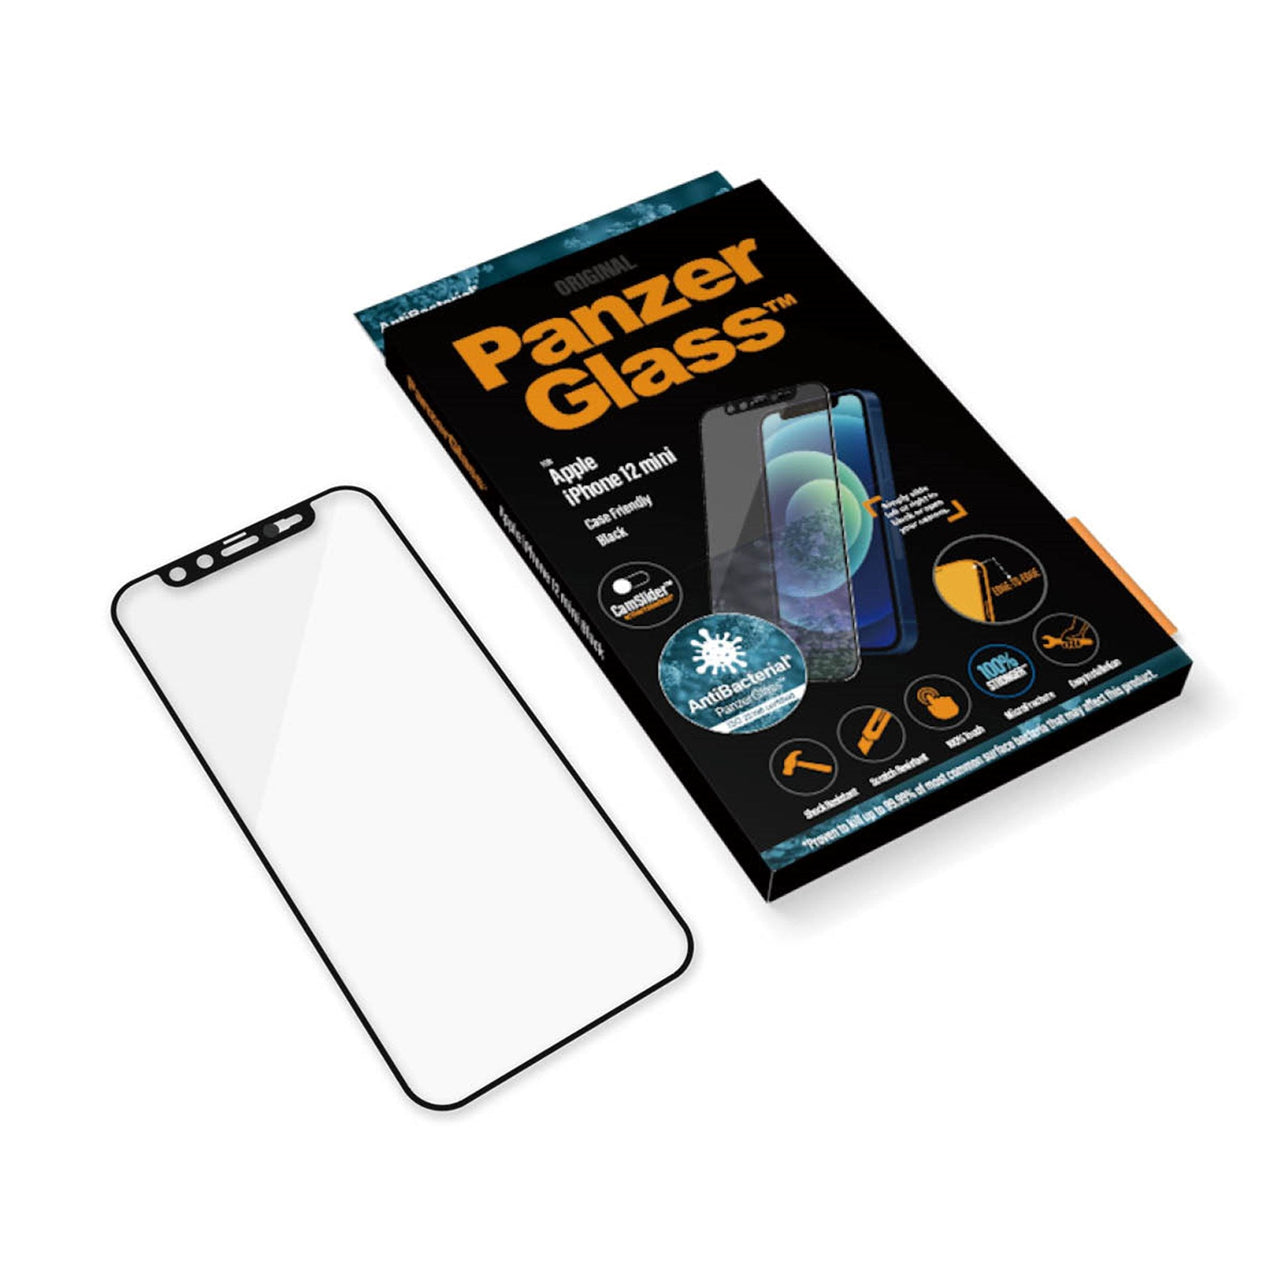 Panzer Glass CamSlider Screen Protector for iPhone 12 Mini - Black